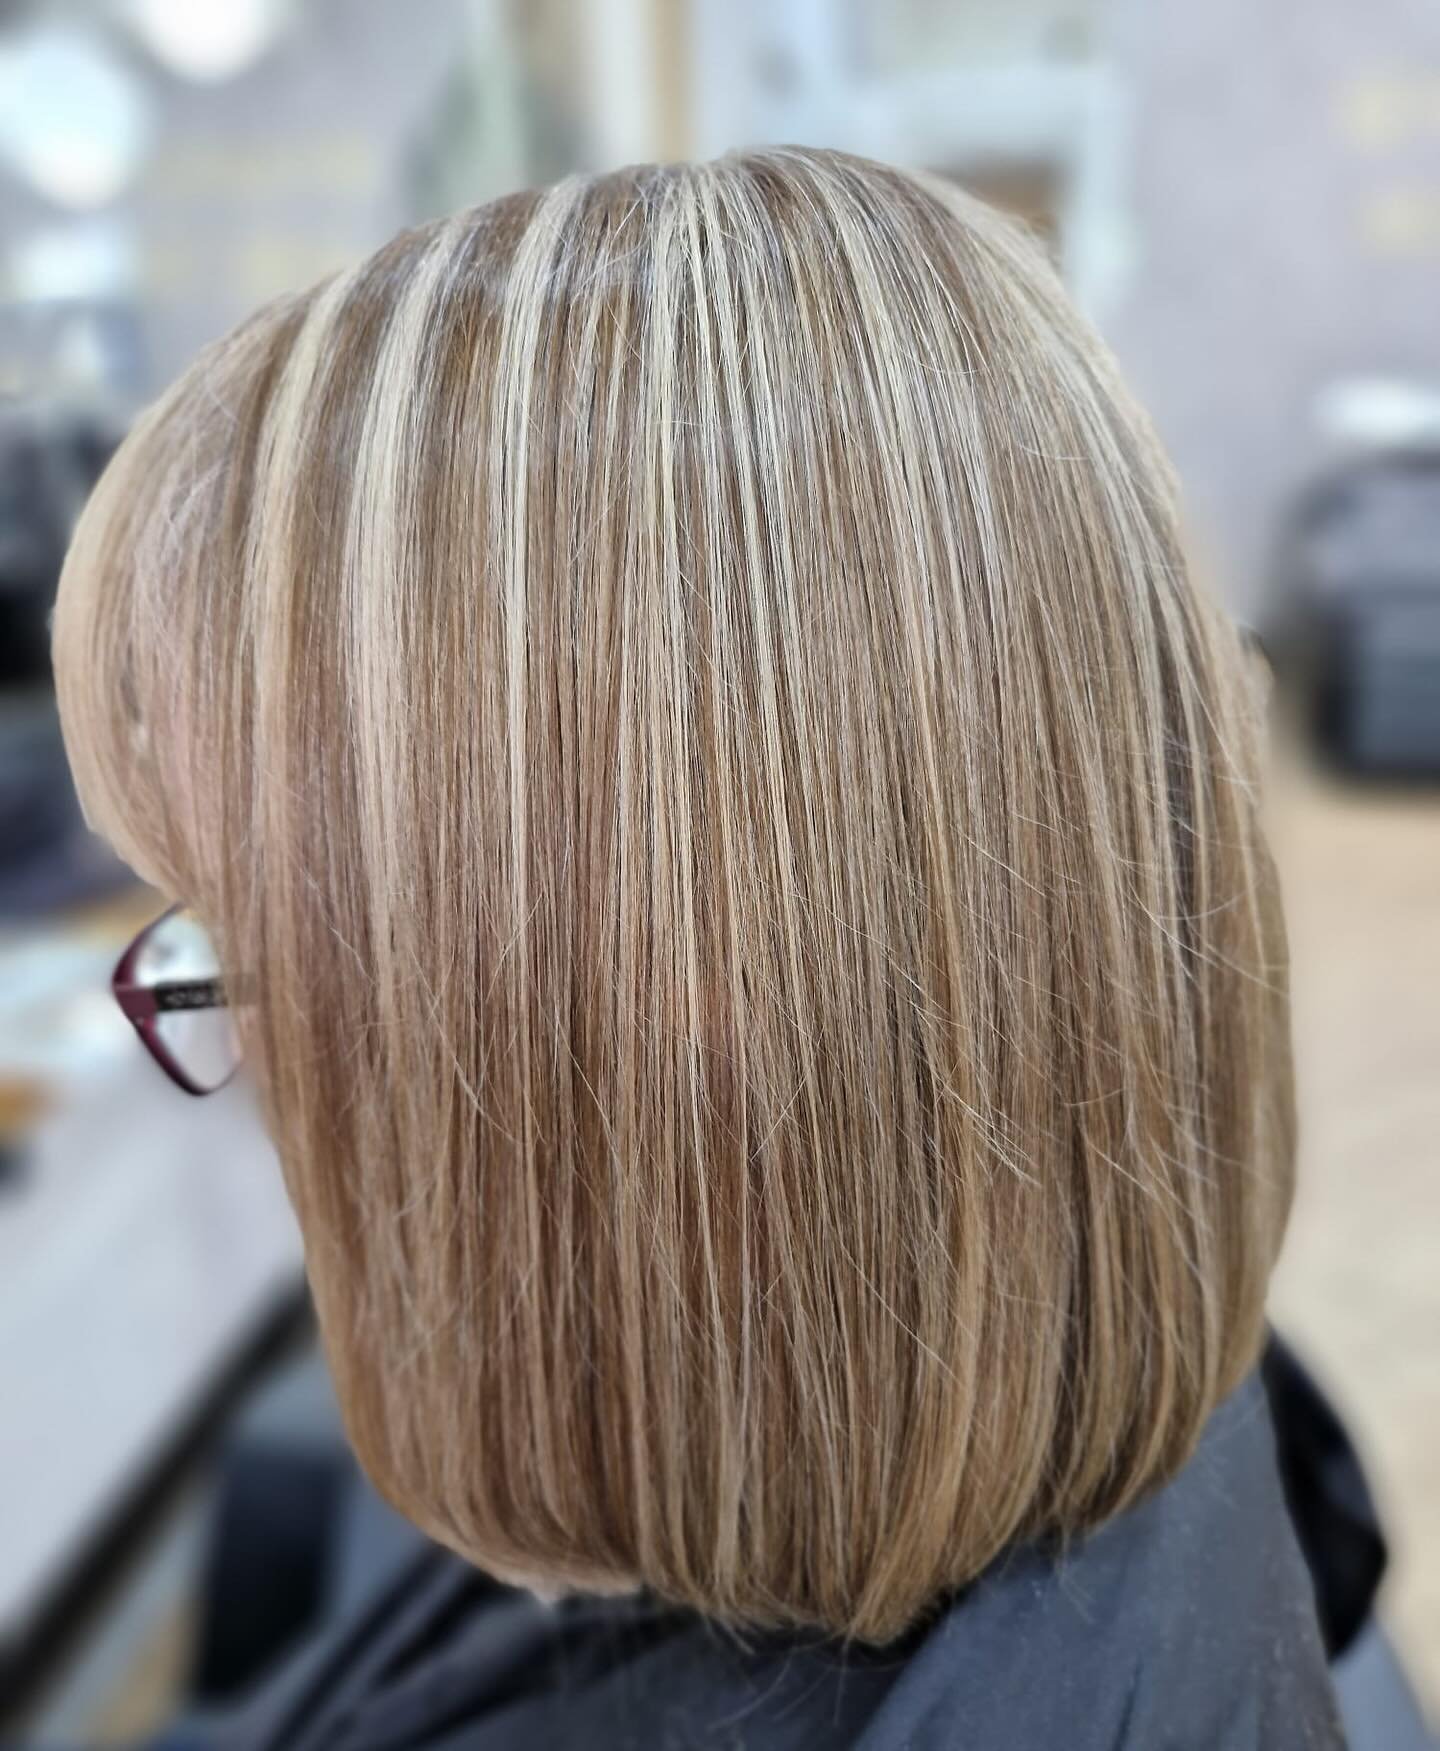 1/2 head highlight with added lowlights, toner, cut and blowdry by Lisa 
&gt;&gt;&gt;swipe for before&gt;&gt;&gt;

#loreal #ghd #nxthair #olaplex #schwartzkopft #bestofbalayage  #hairgoals #hairinspo #hairstyle #hairdressers #hair #hairstylist #hairc